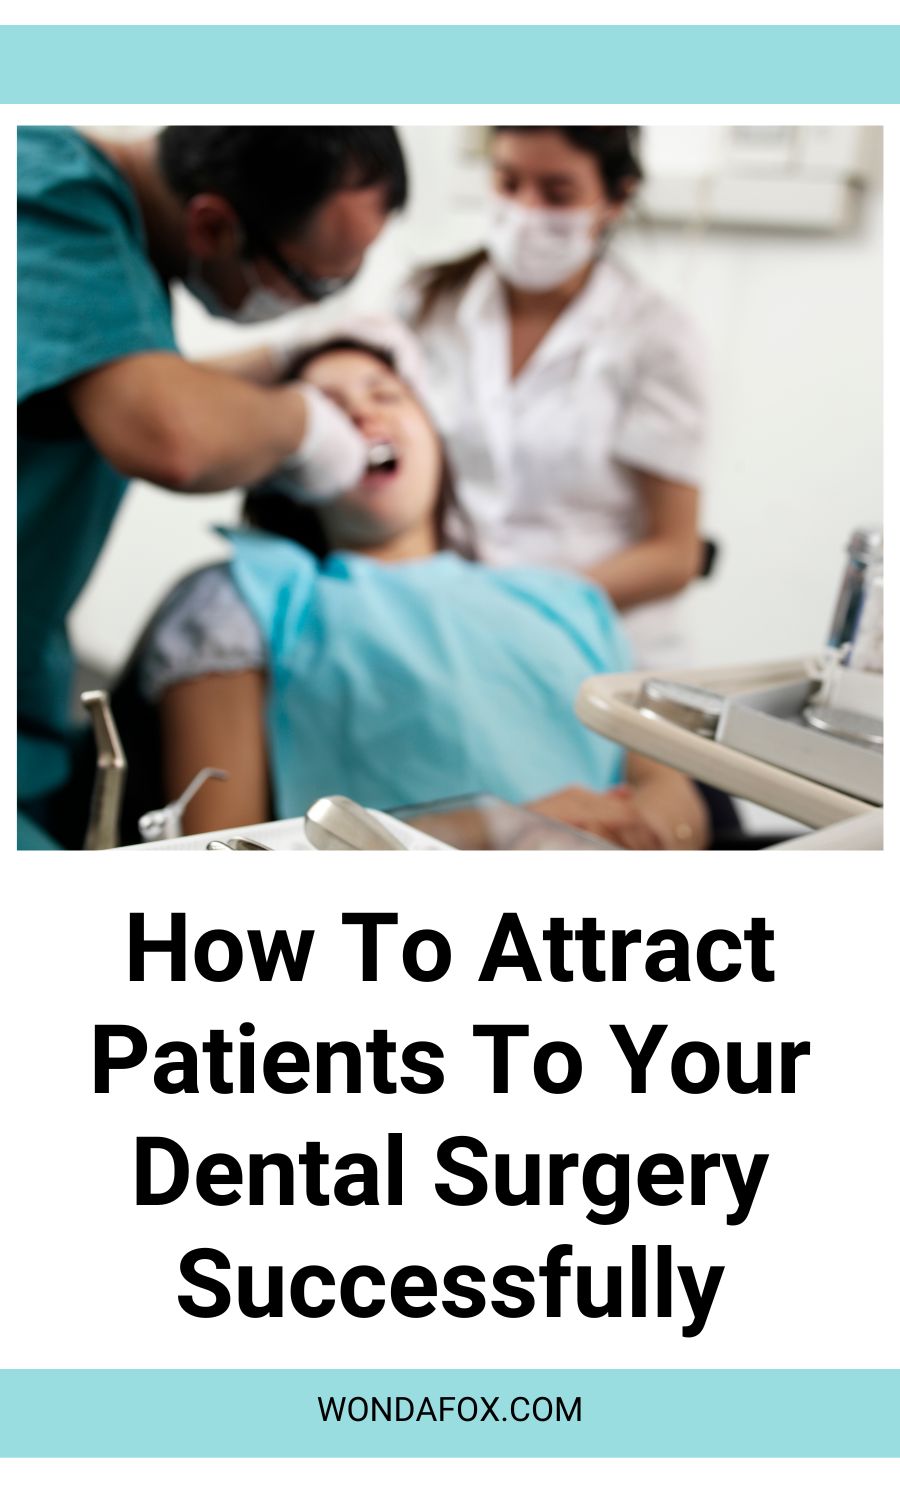 How To Attract Patients To Your Dental Surgery Successfully